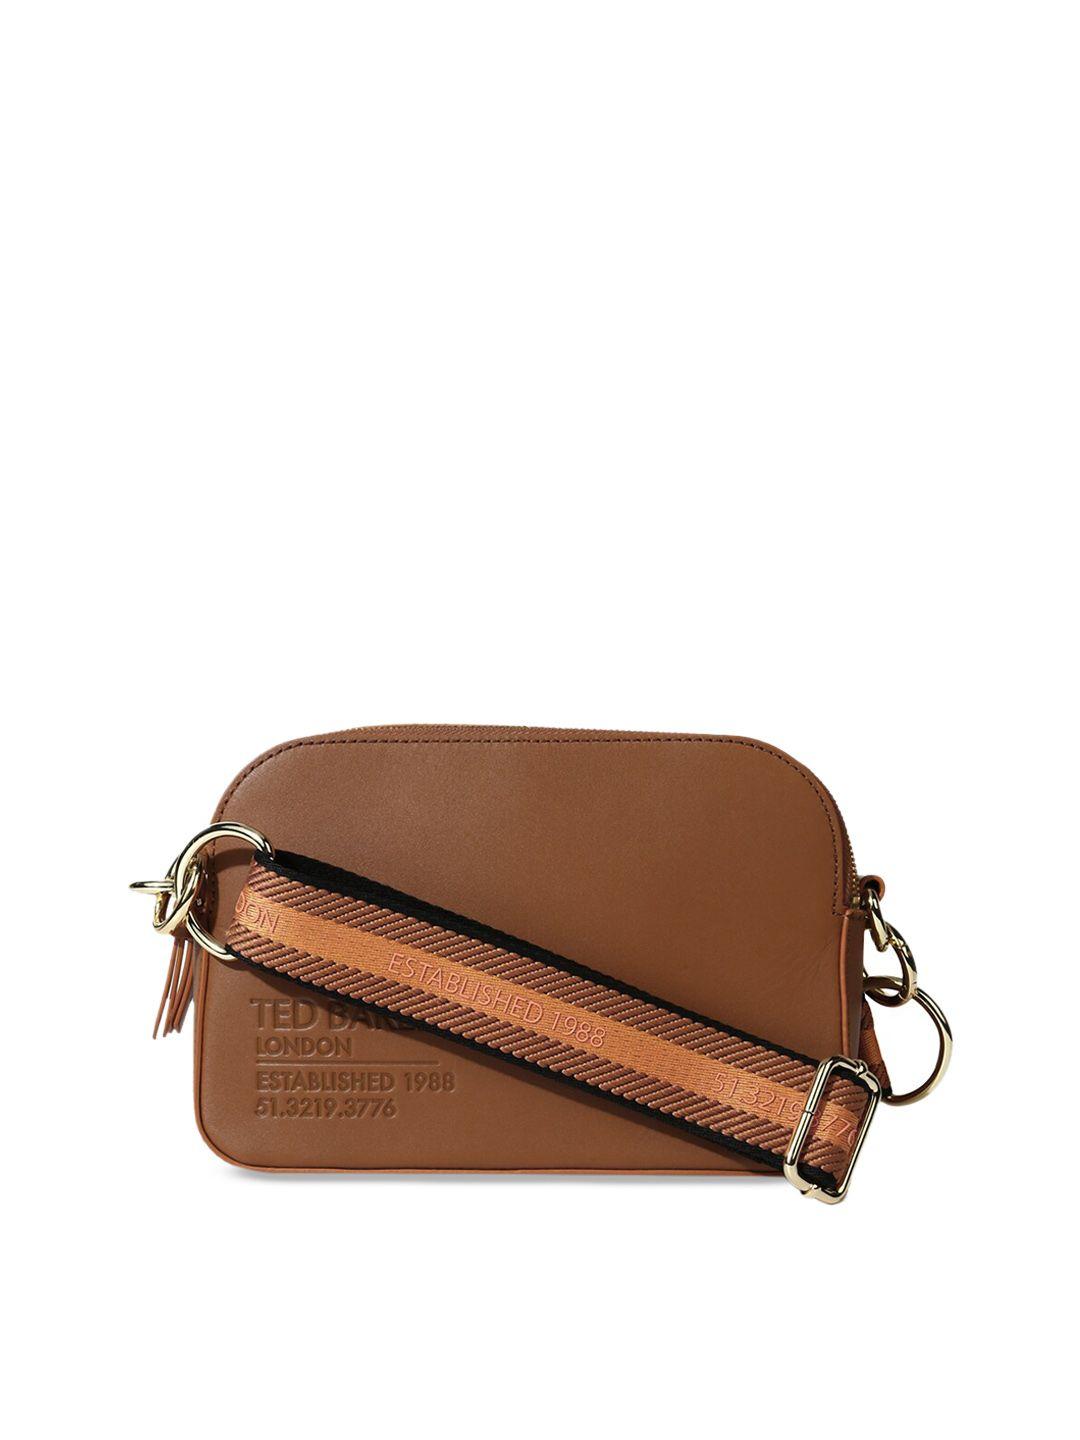 ted baker brown colourblocked leather half moon sling bag with tasselled